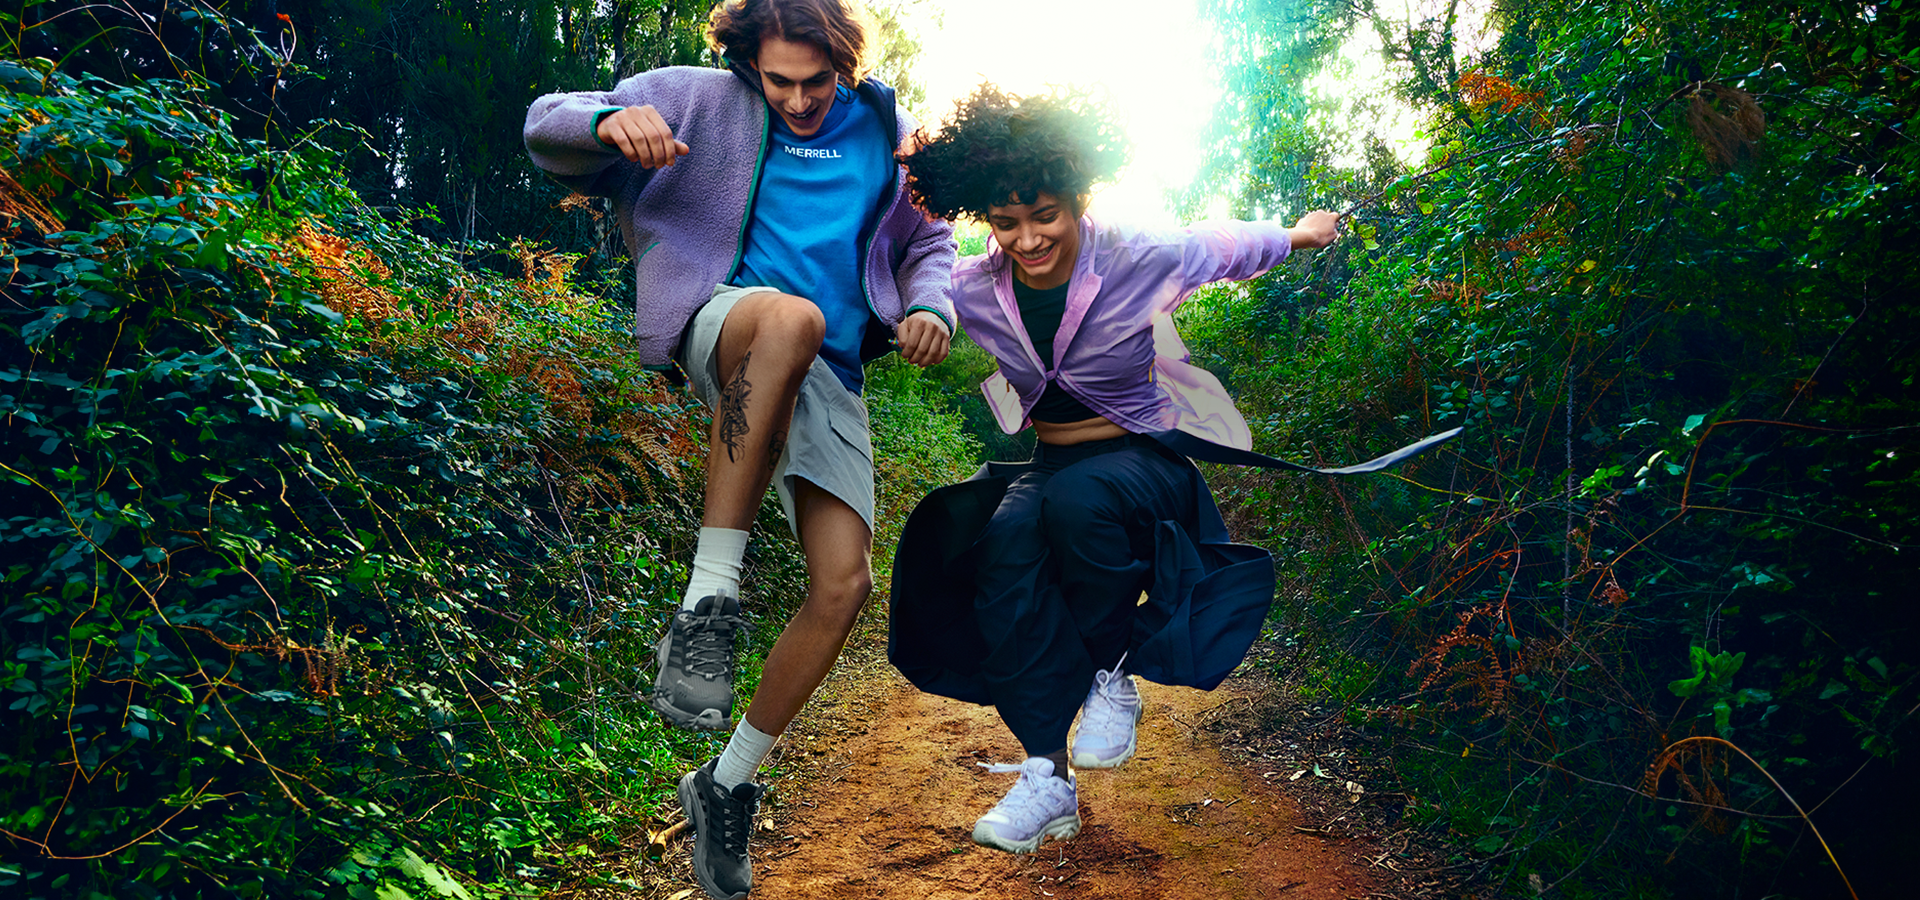 Two people jumping on a dirt path wearing Merrell hiking shoes.